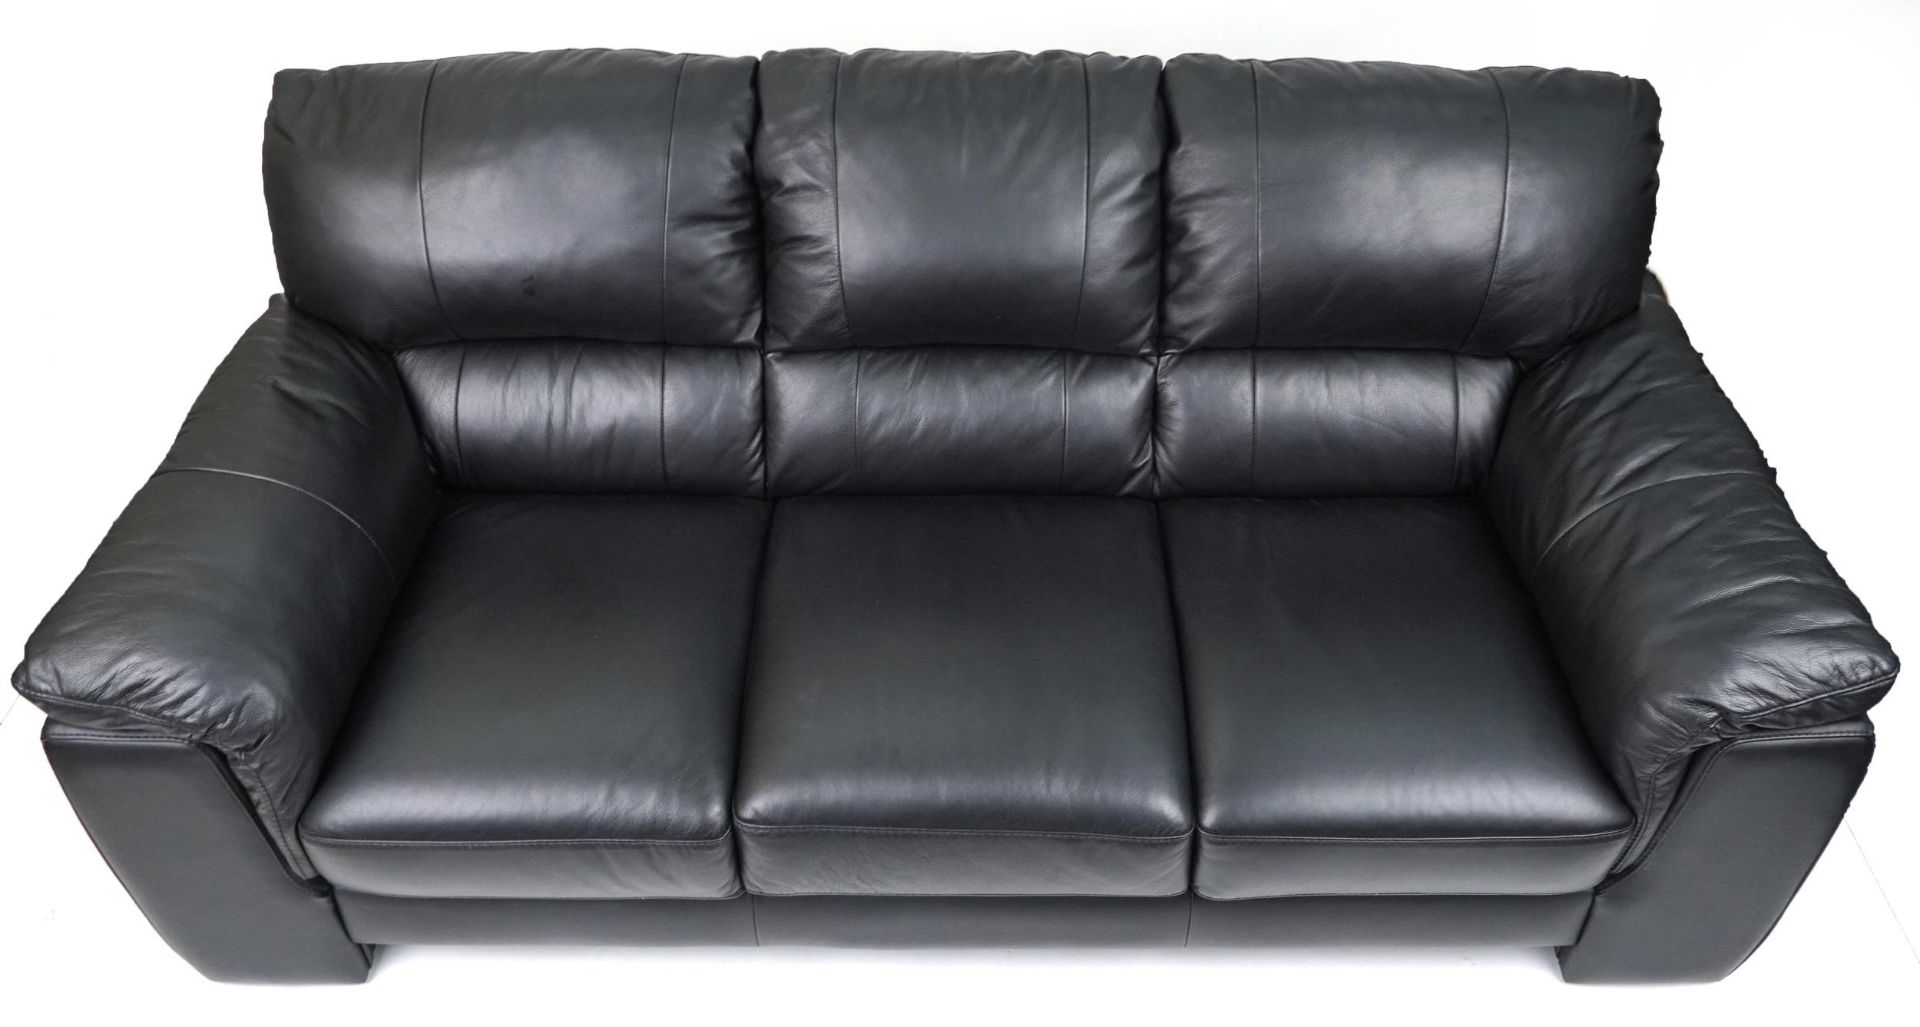 Contemporary three seater settee with black leather upholstery, 90cm H x 200cm W x 90cm D - Bild 2 aus 3